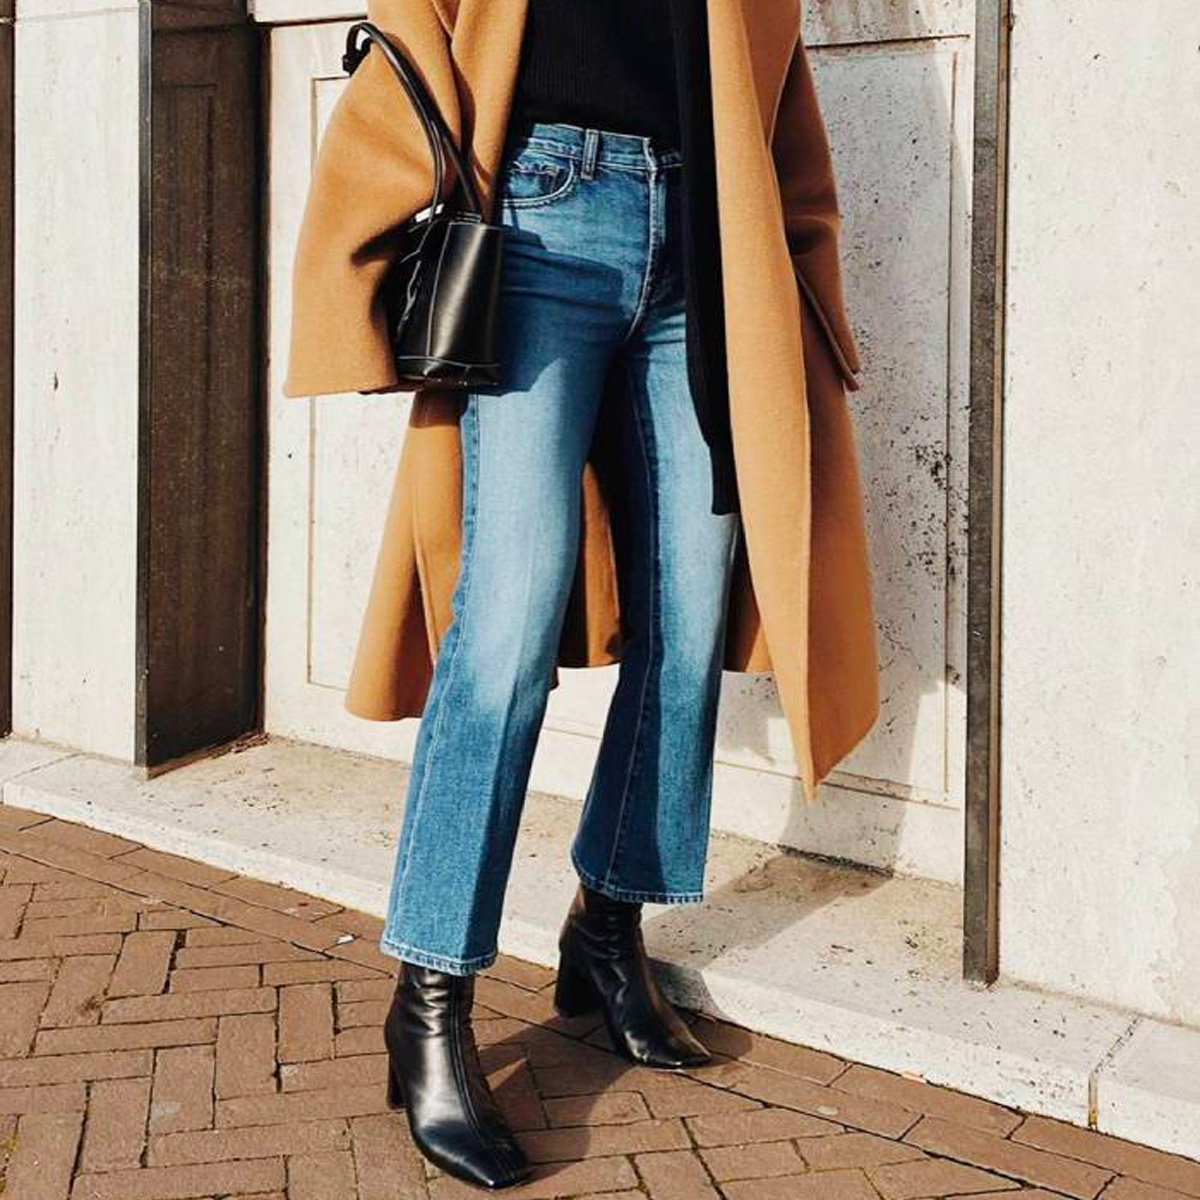 12 Incredibly Chic Coat-and-Boots Outfits for Women